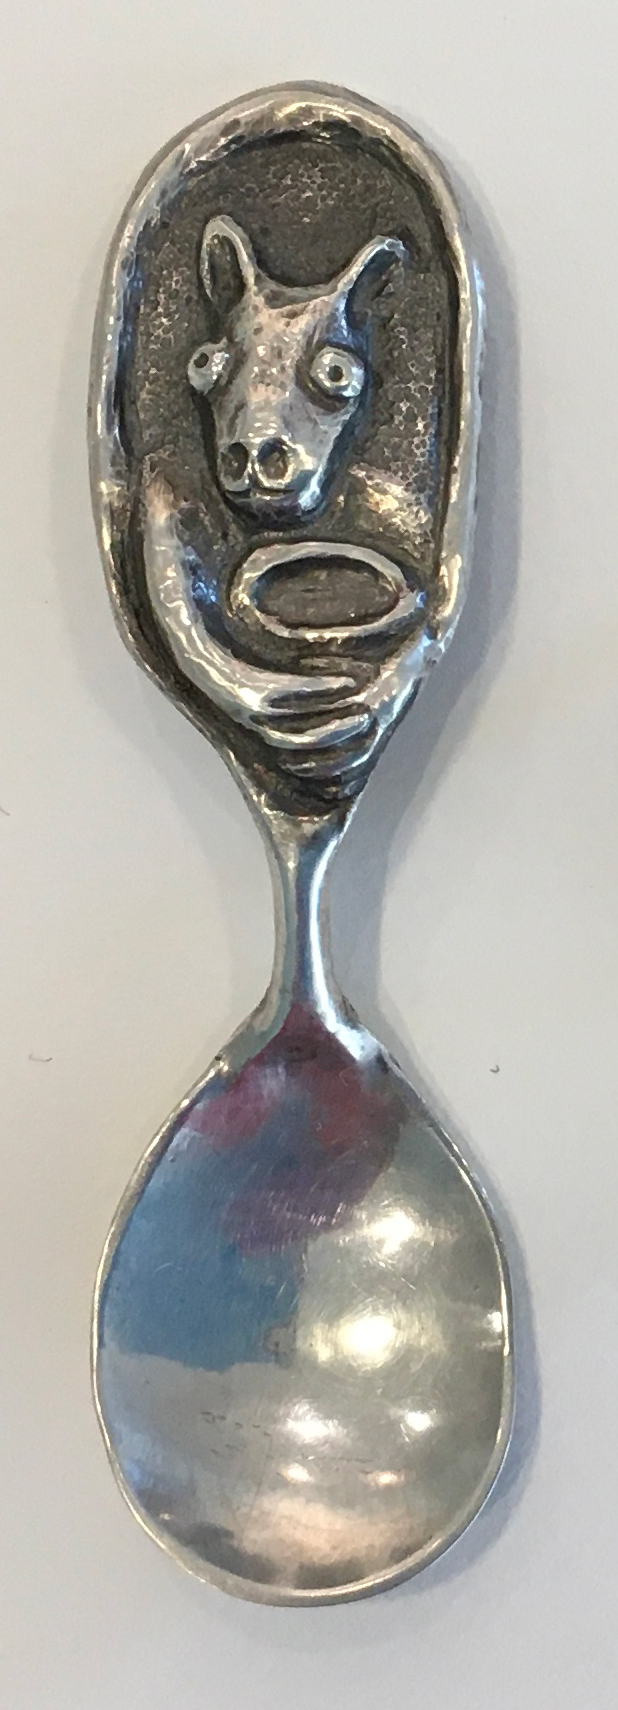 Linda Kelen, The Big Brother, 2018, sterling silver, 4 inches, collection of the artist